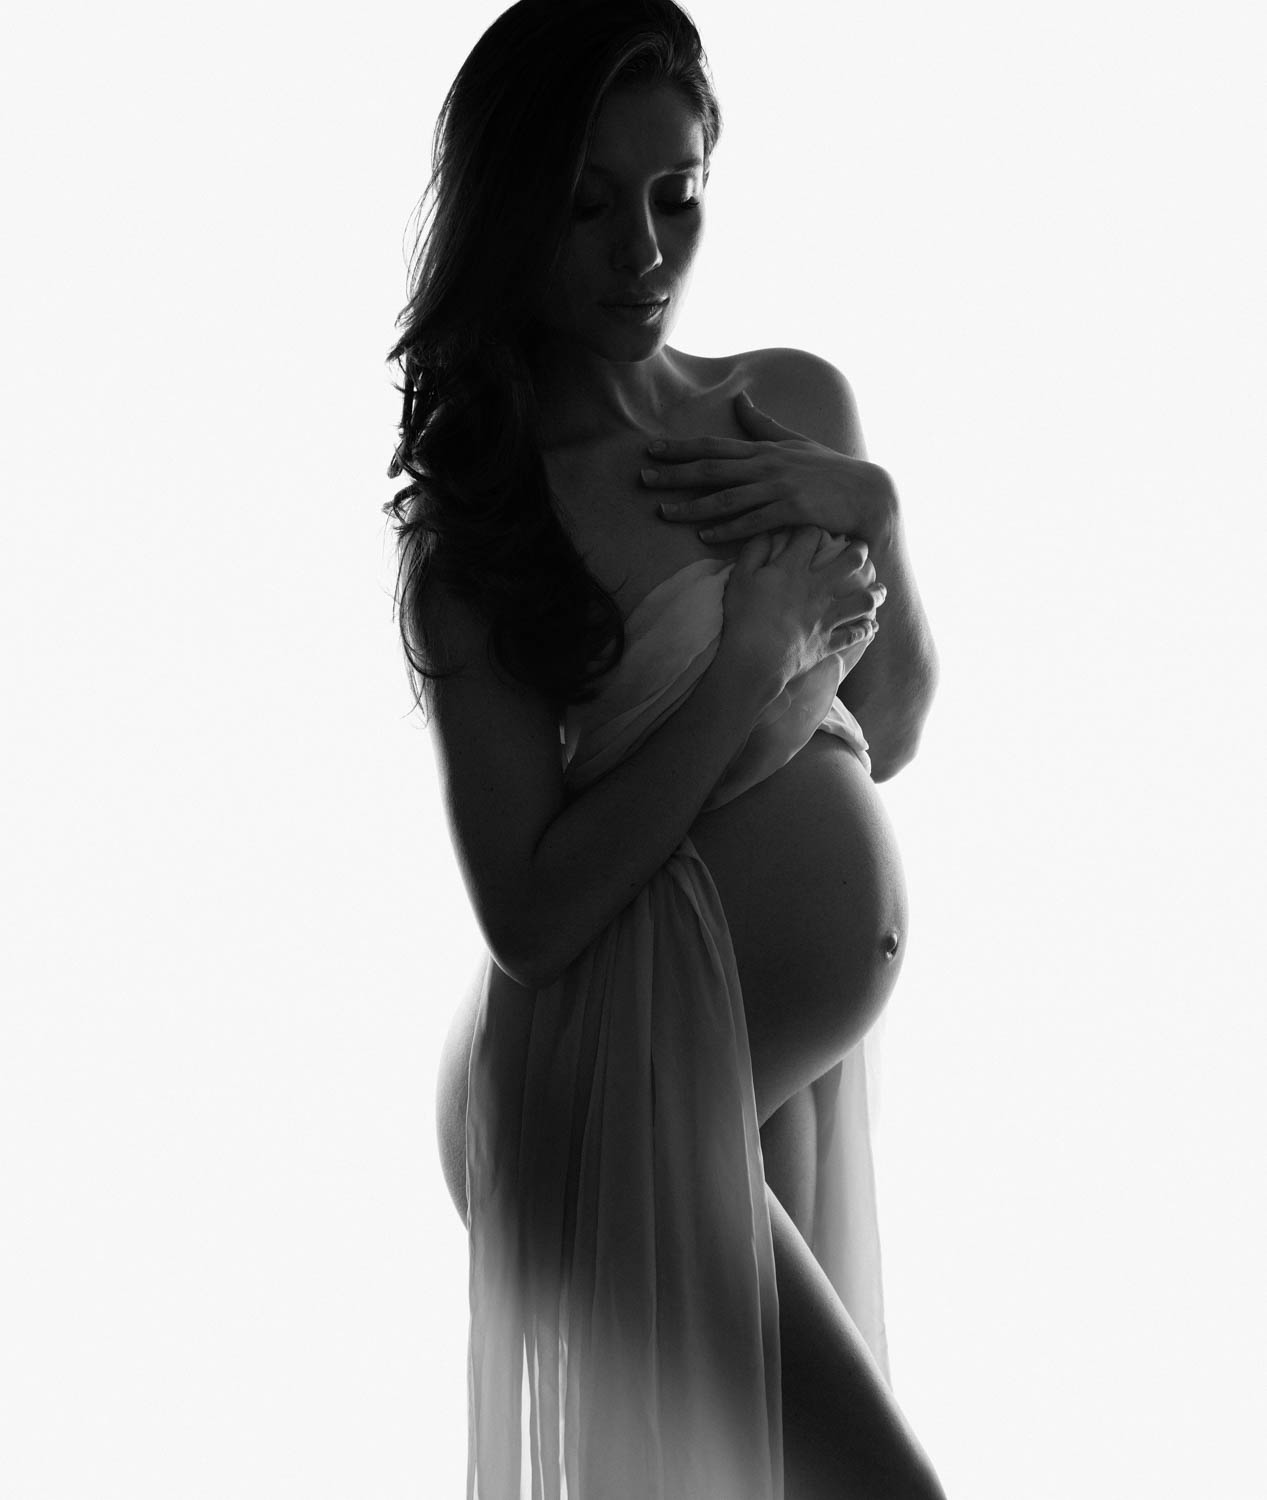 artistic pregnancy photography in NY